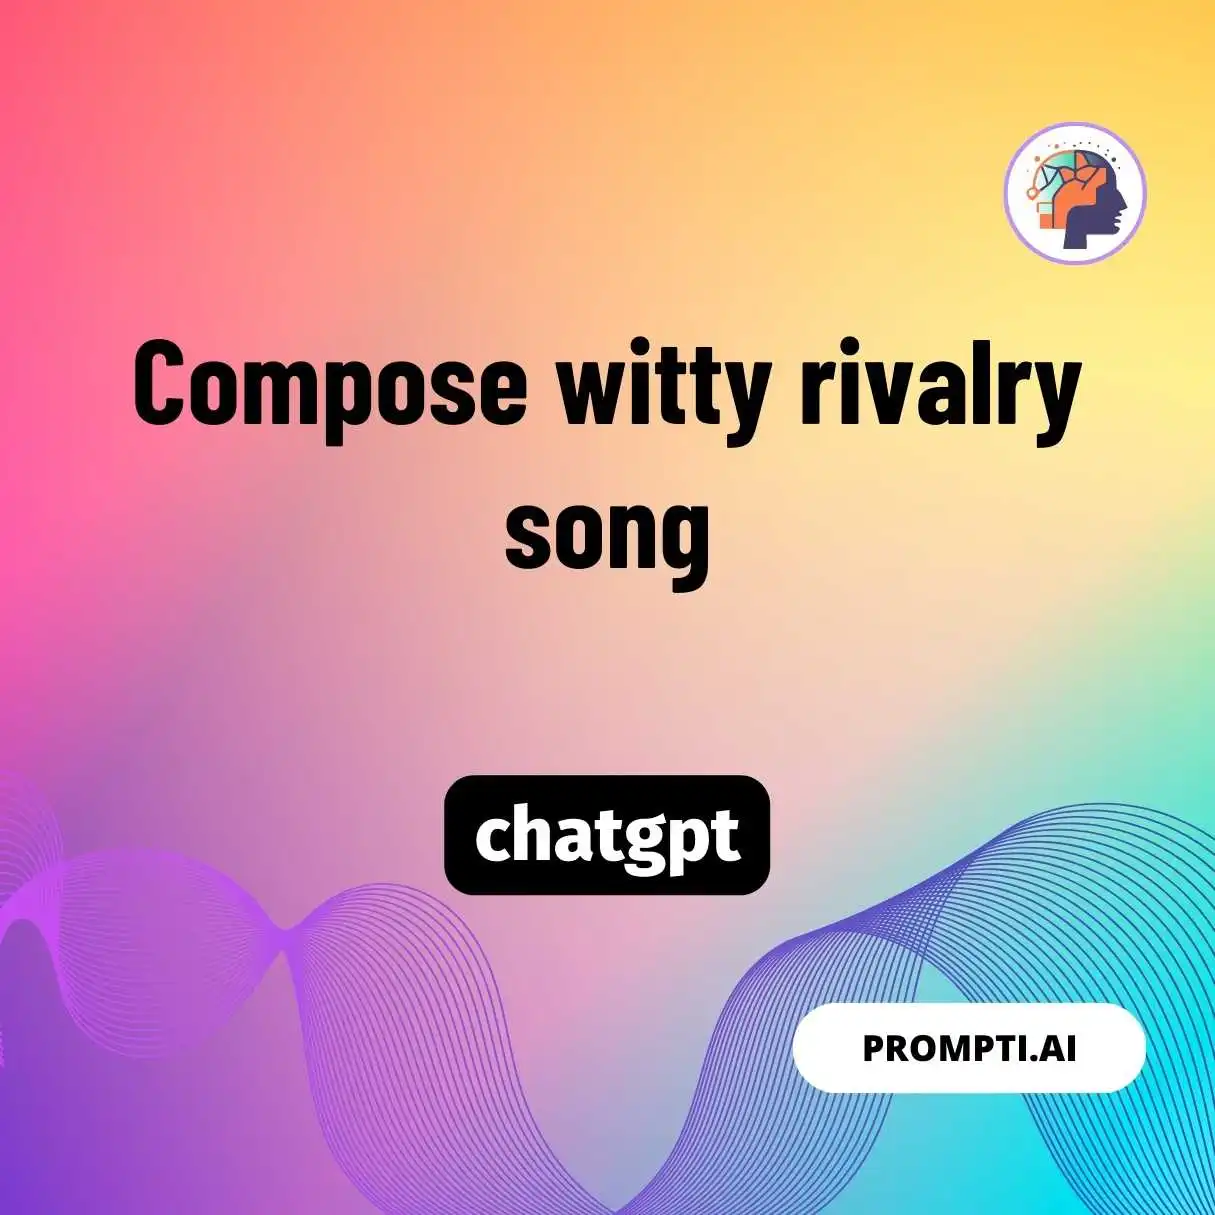 Compose witty rivalry song